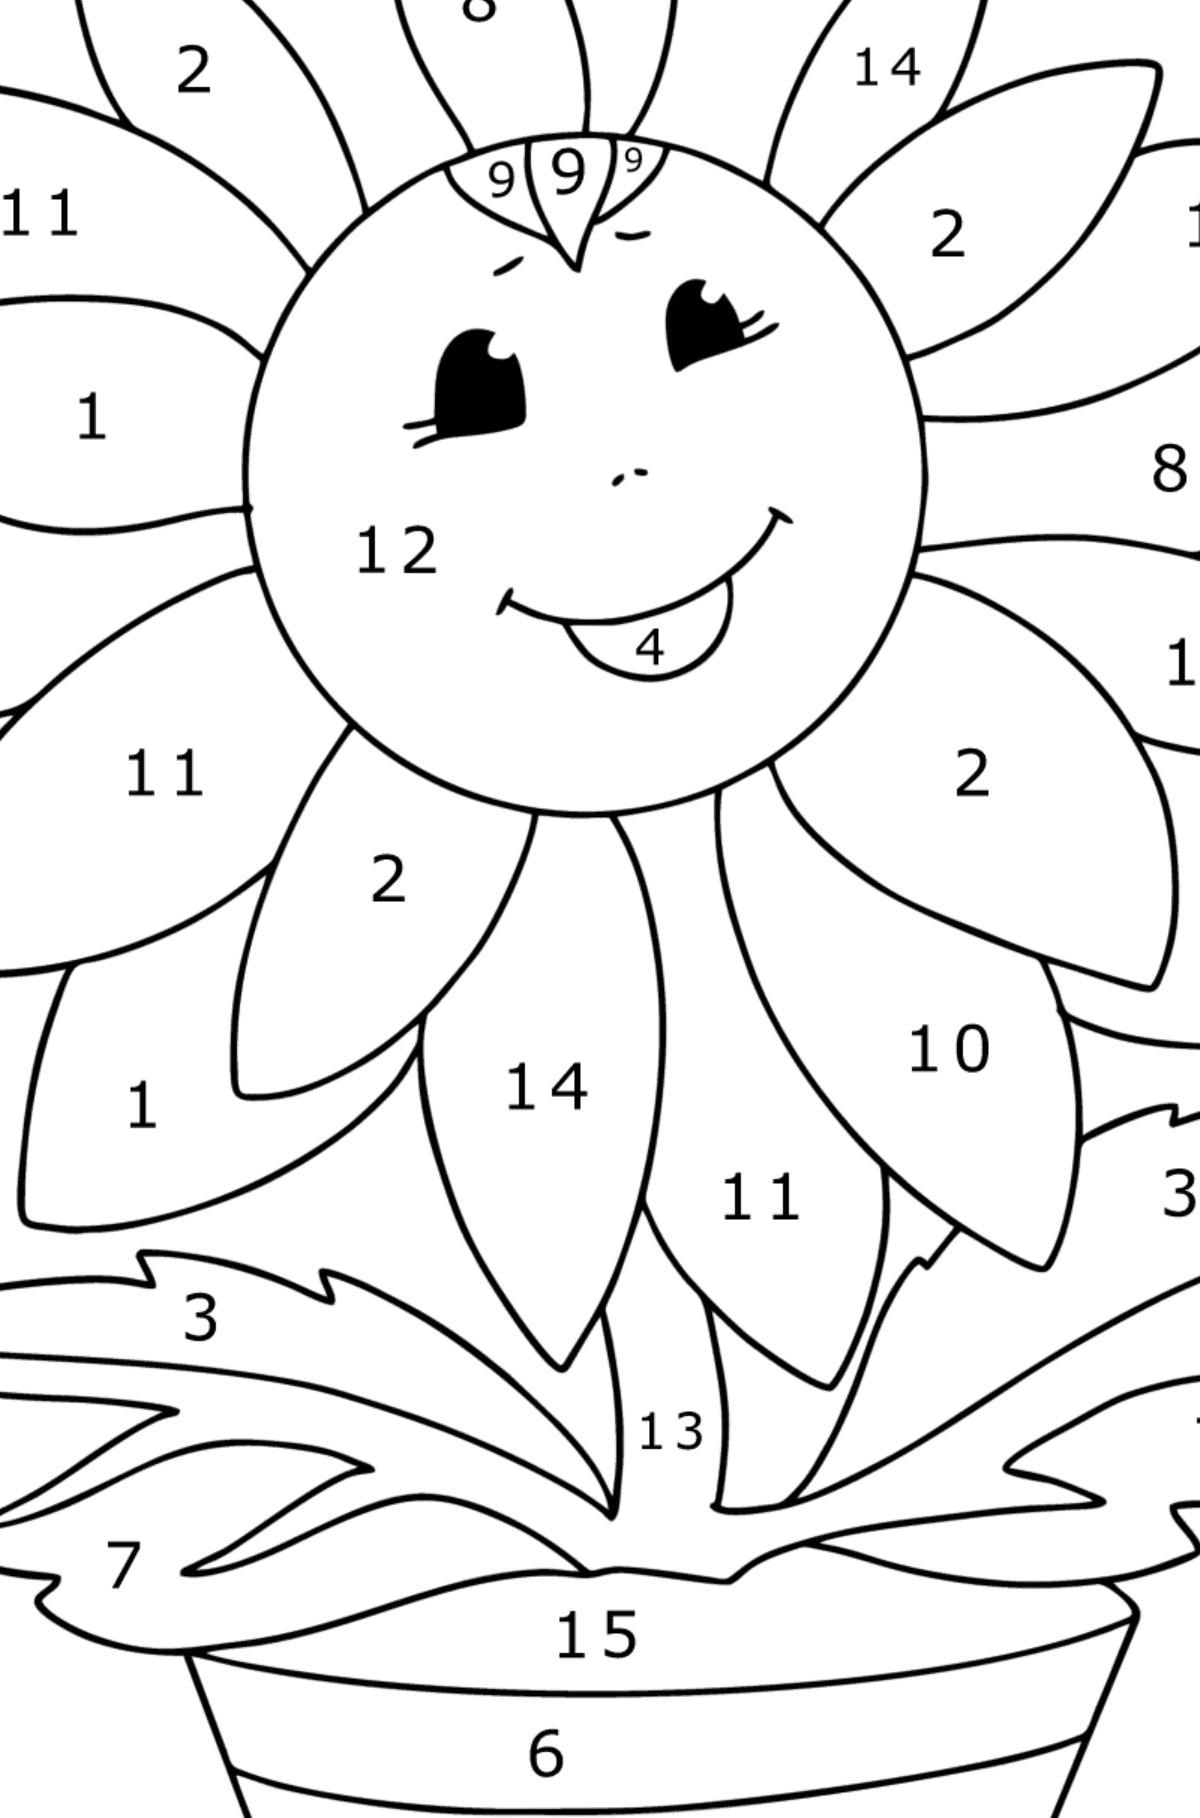 Sunflower with eyes coloring page - Coloring by Numbers for Kids